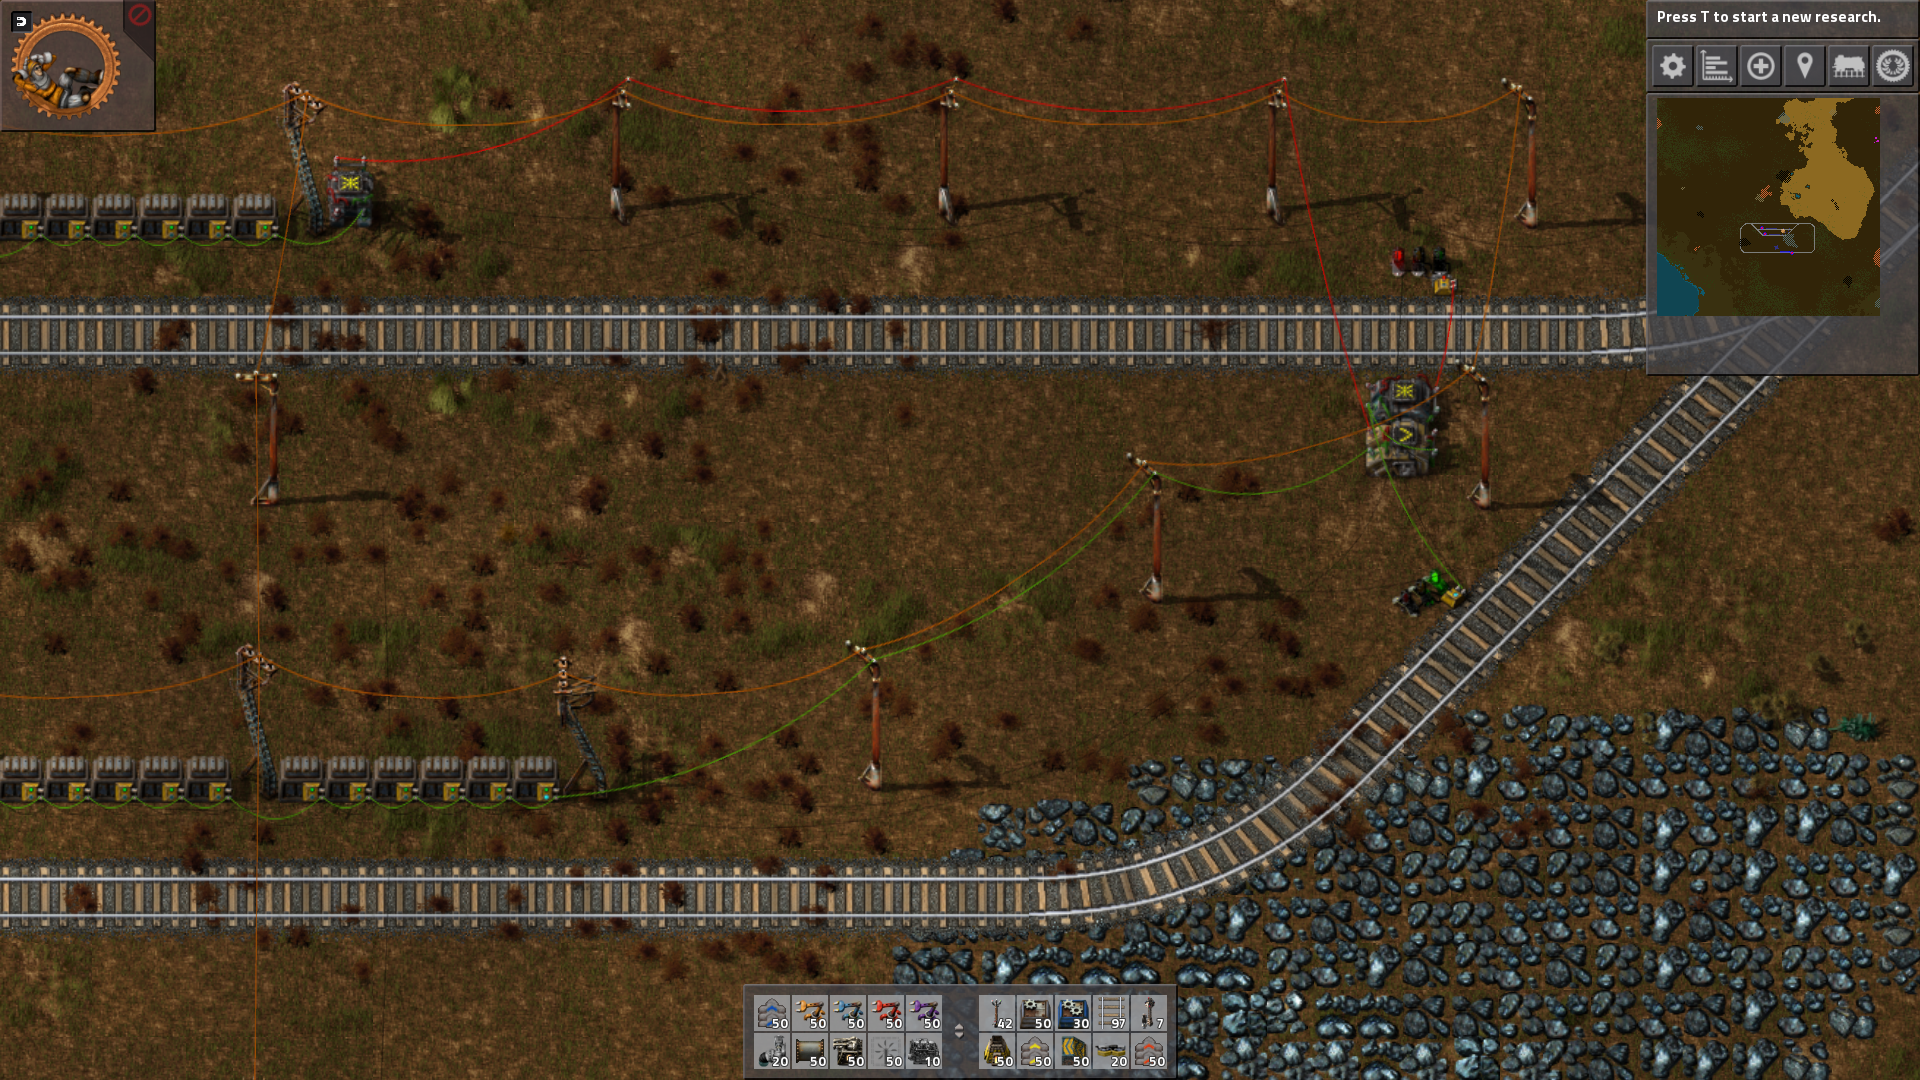 Close right station if left open and has more iron